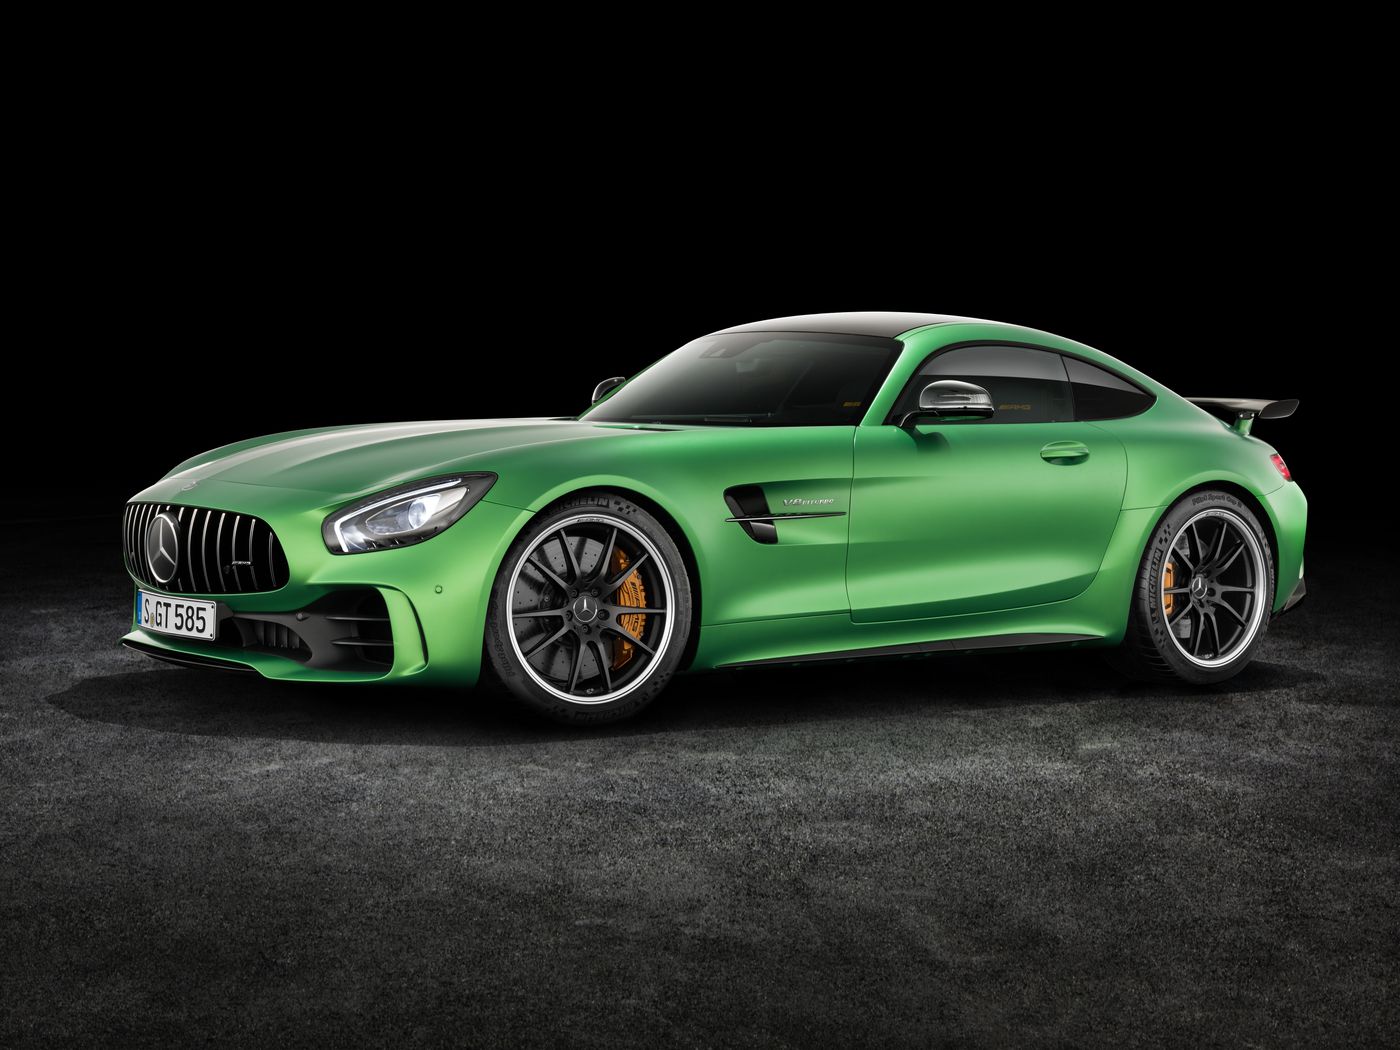 The New Amg Gt R Is Mercedes Benz S Most Hardcore Sports Car The Verge